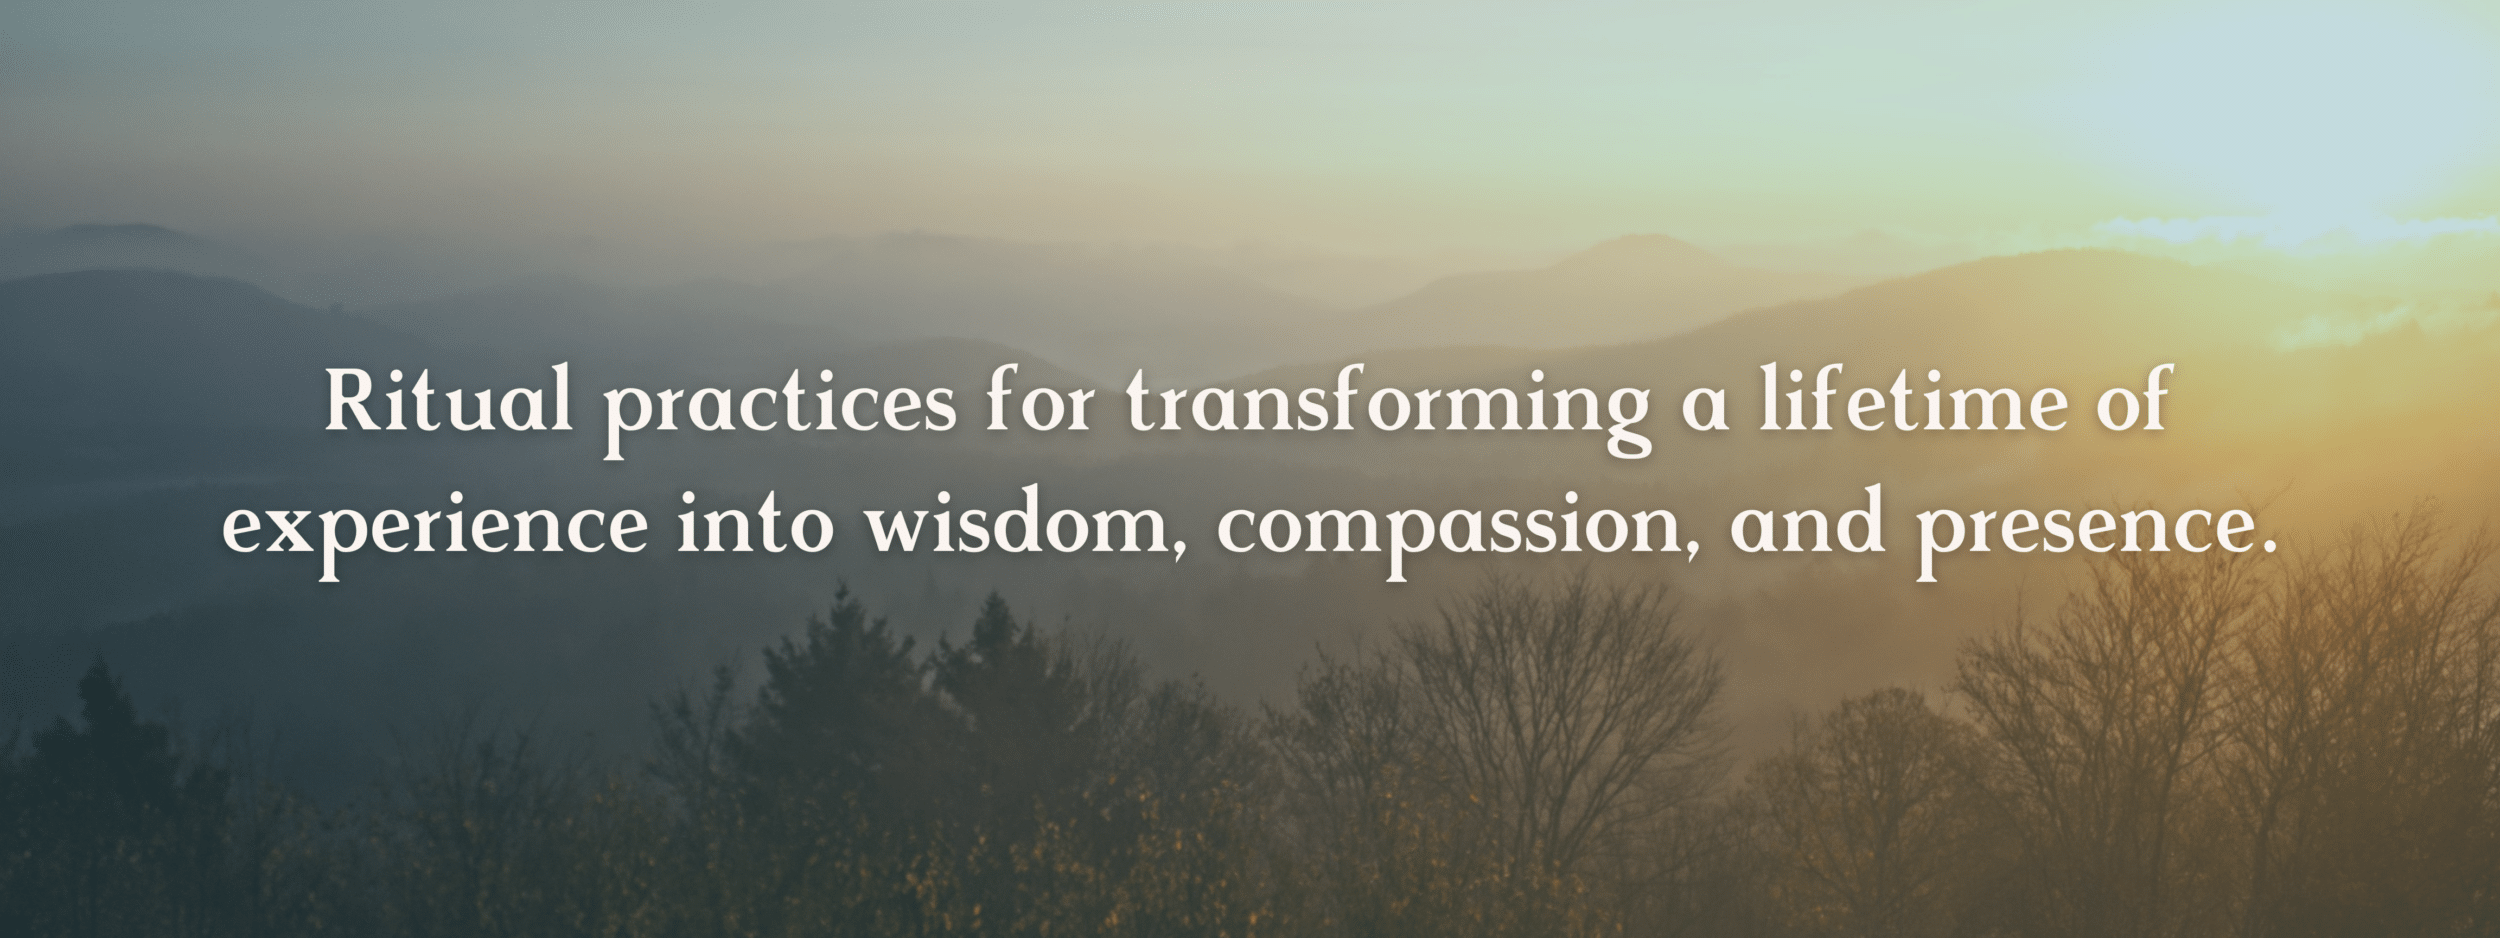 Ritual Practices for transforming a lifetime of experience into wisdom, compassion, and presence